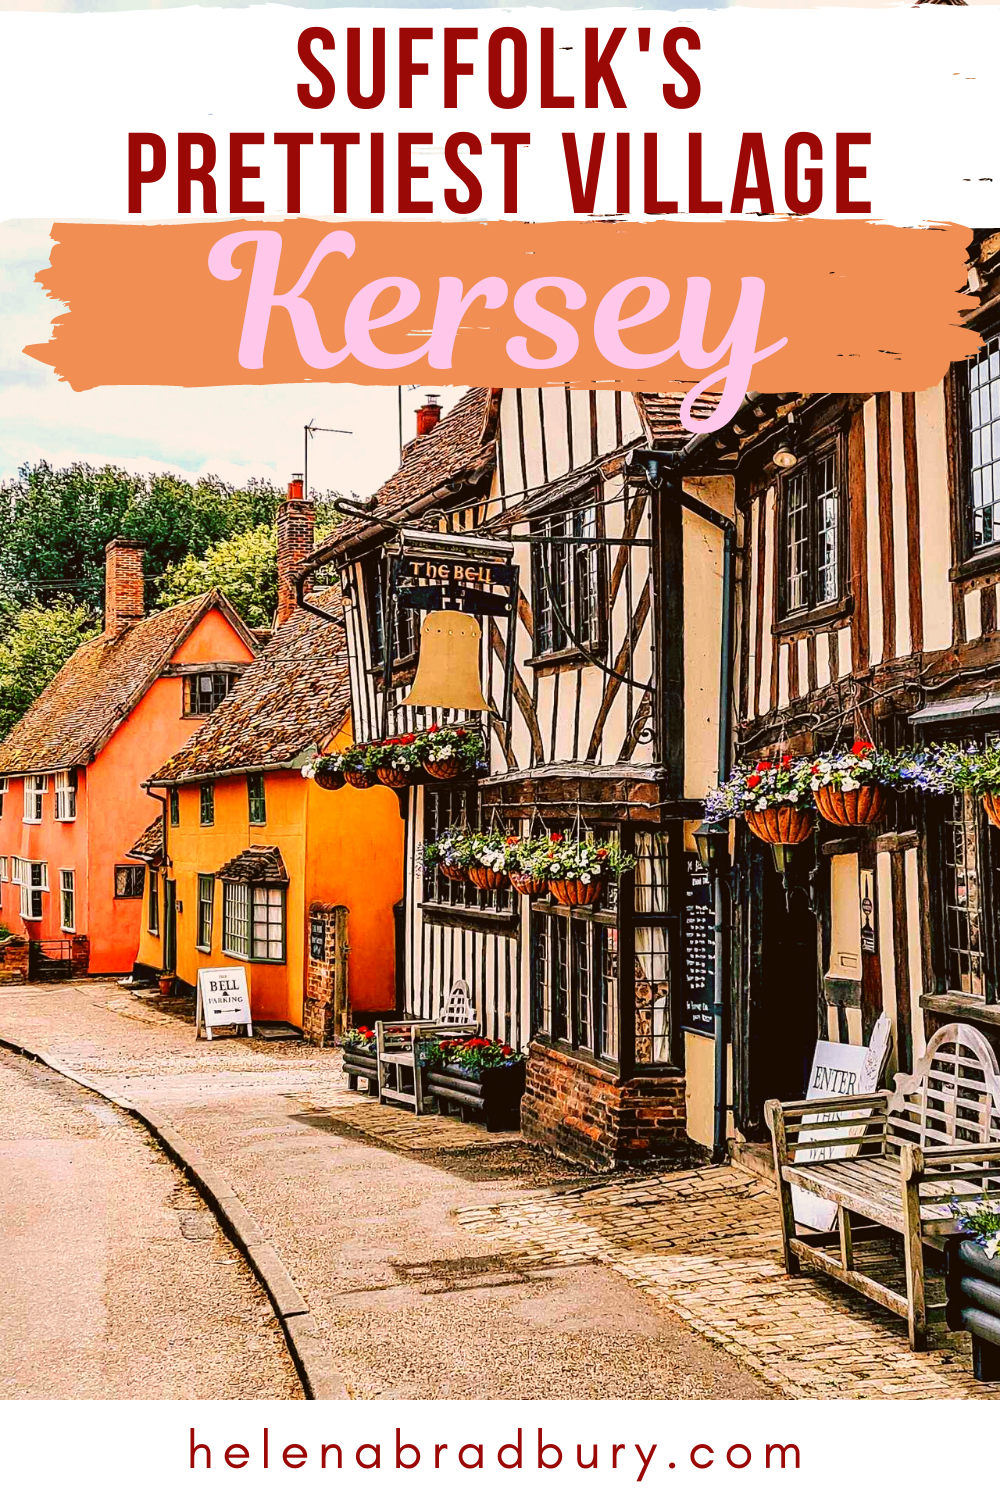 If you’re looking for the best villages to visit in Suffolk, don’t miss Kersey. This medieval village is definitely a contender for the prettiest village in Suffolk. | pretty villages in england | quaint villages in england | beautiful villages engl…